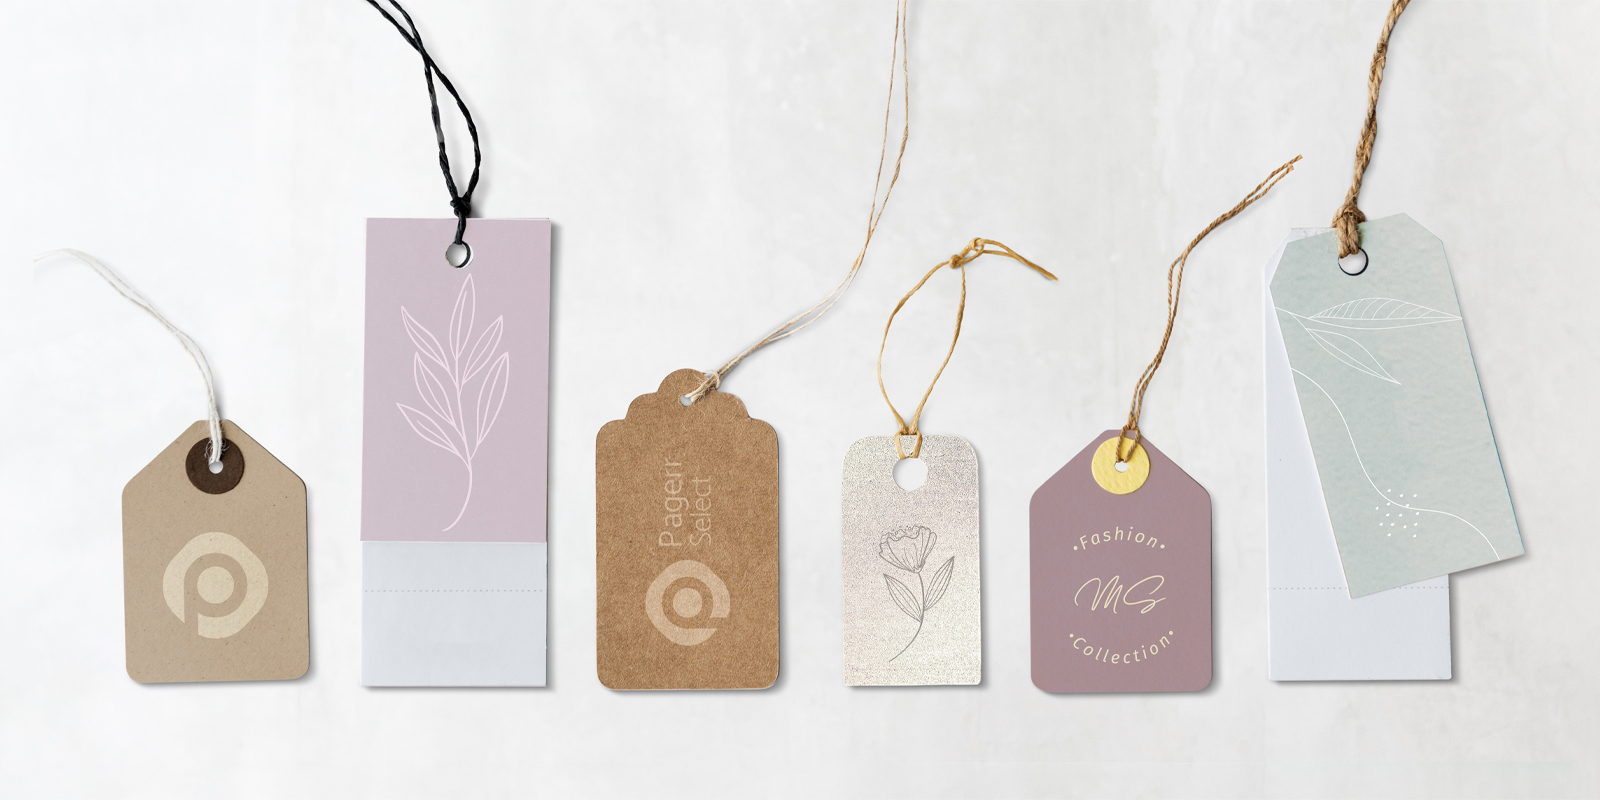 Product tags in Wollongong - Print with Pagerr